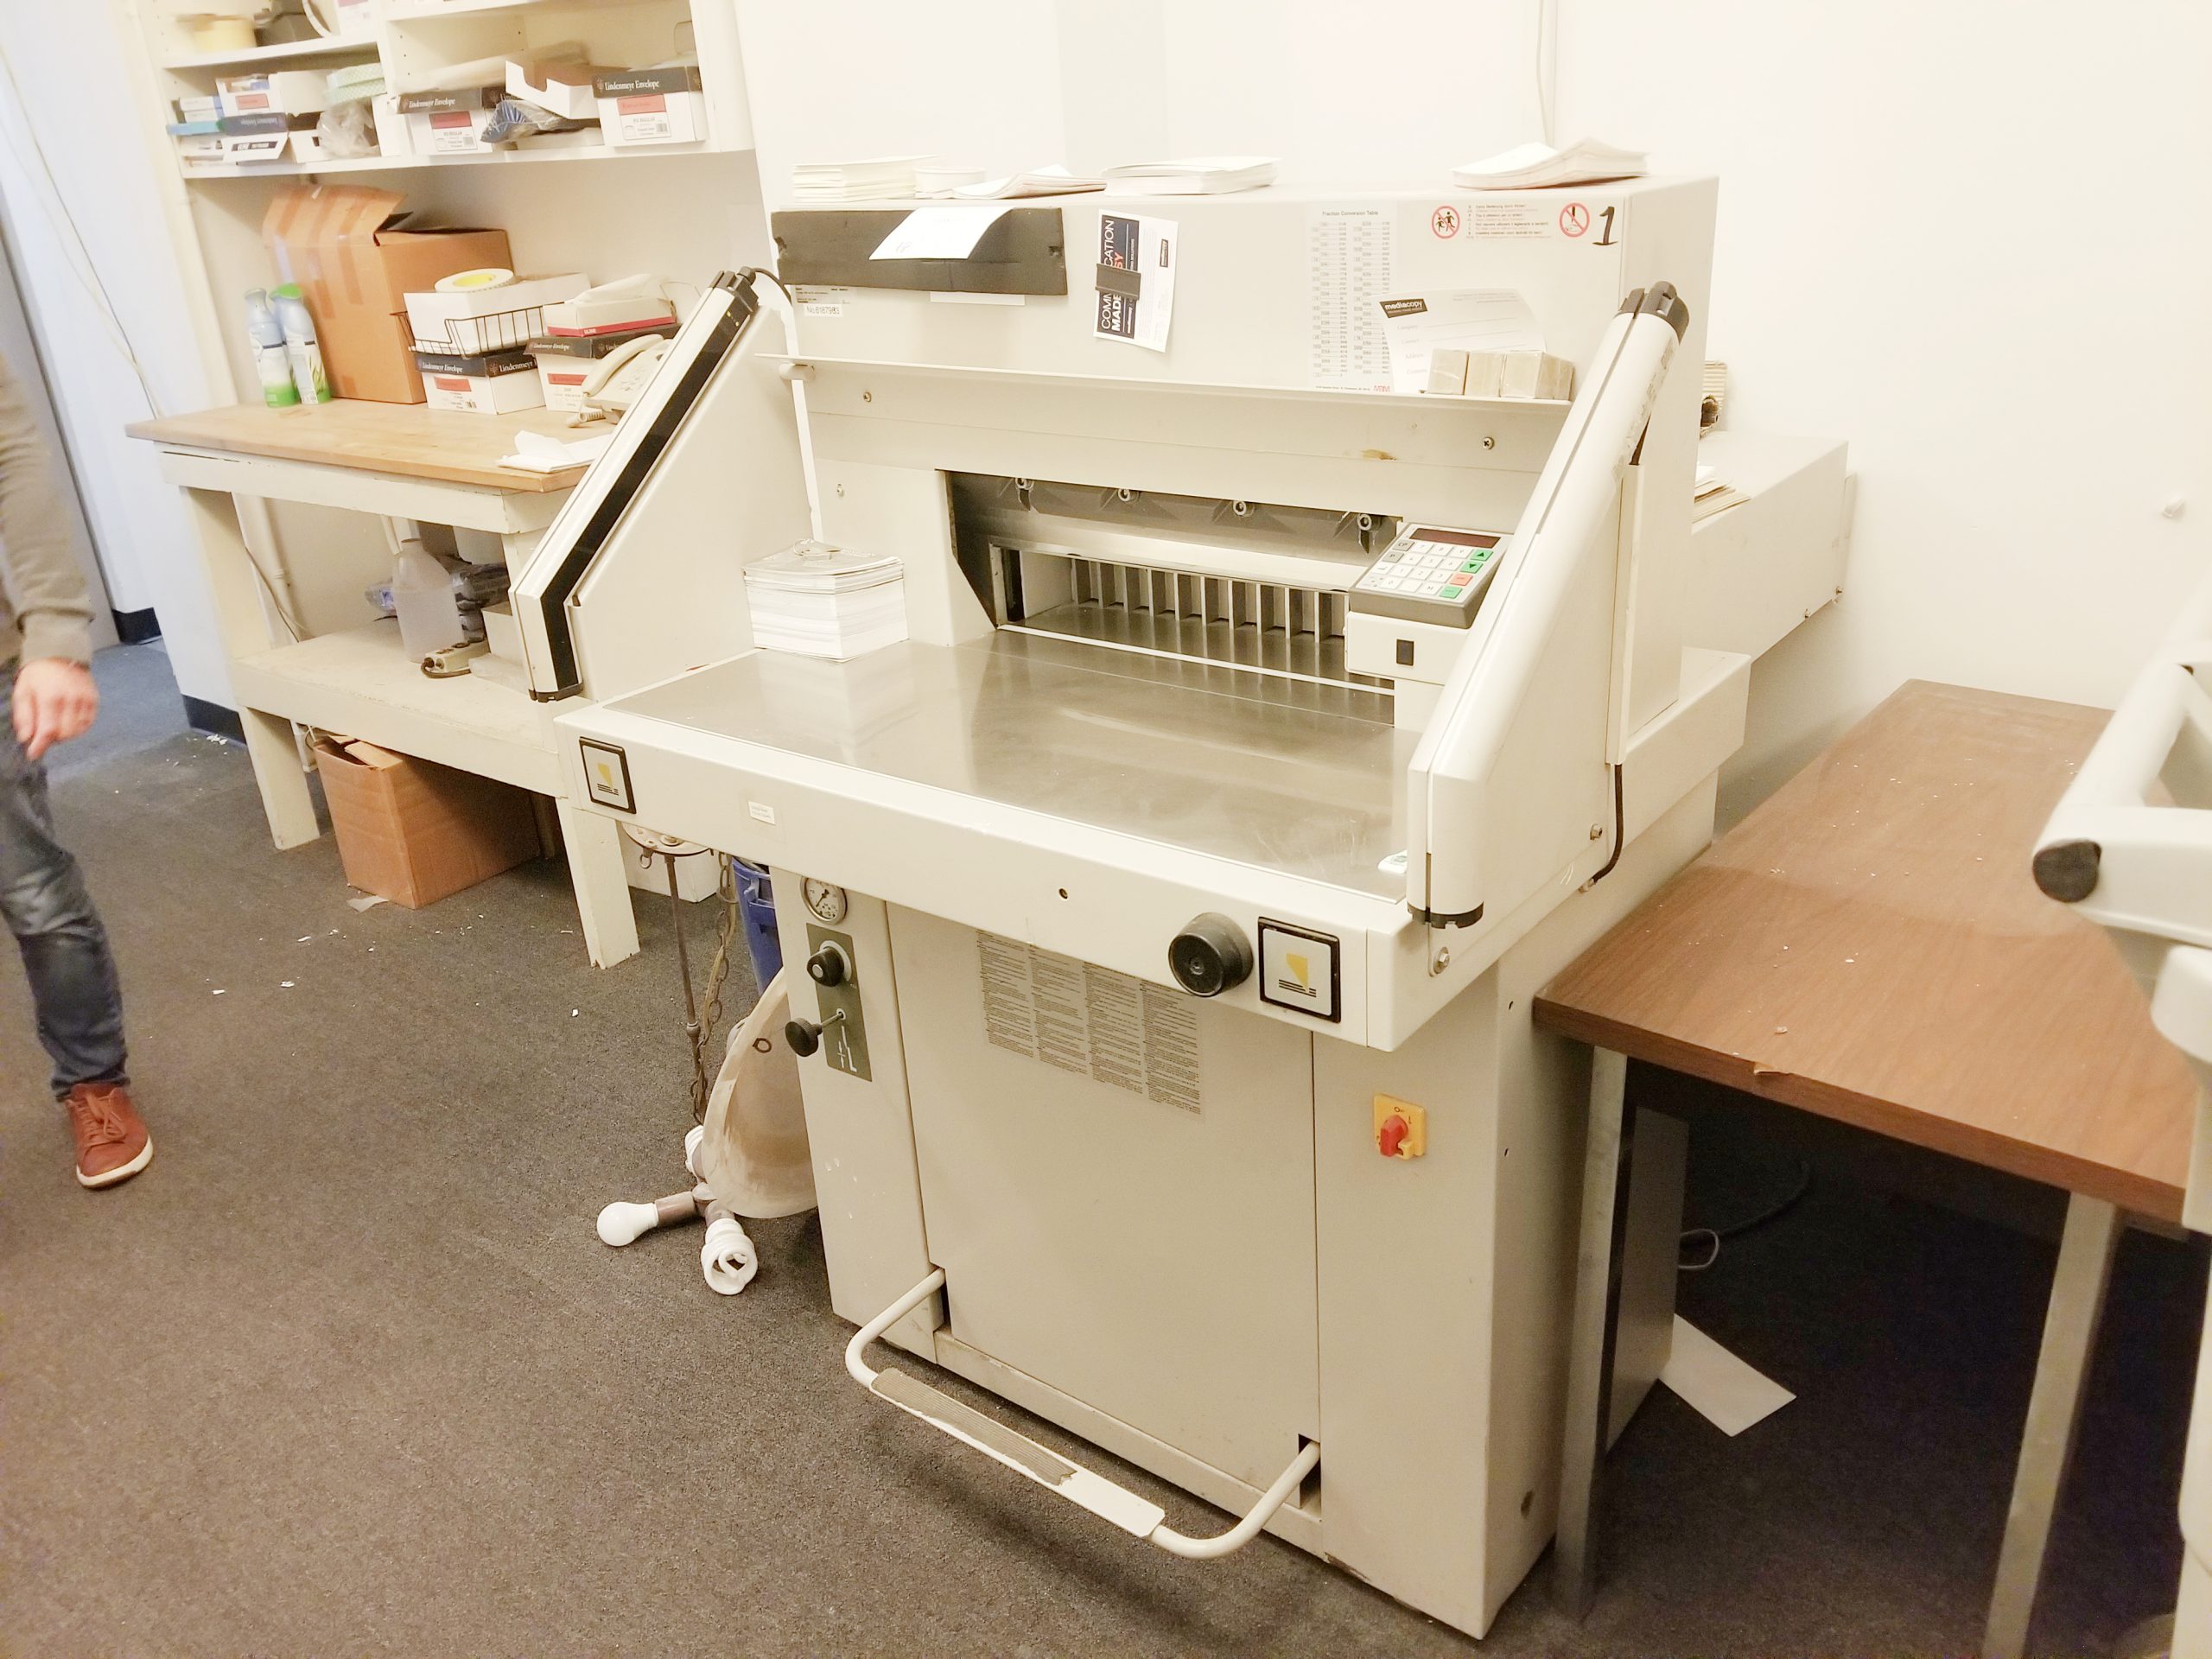 MBM Triumph 5551 EP 21 5/8″ Programmable Hydraulic Paper Cutter (Used) Item # UE-020122C (New Jersey)